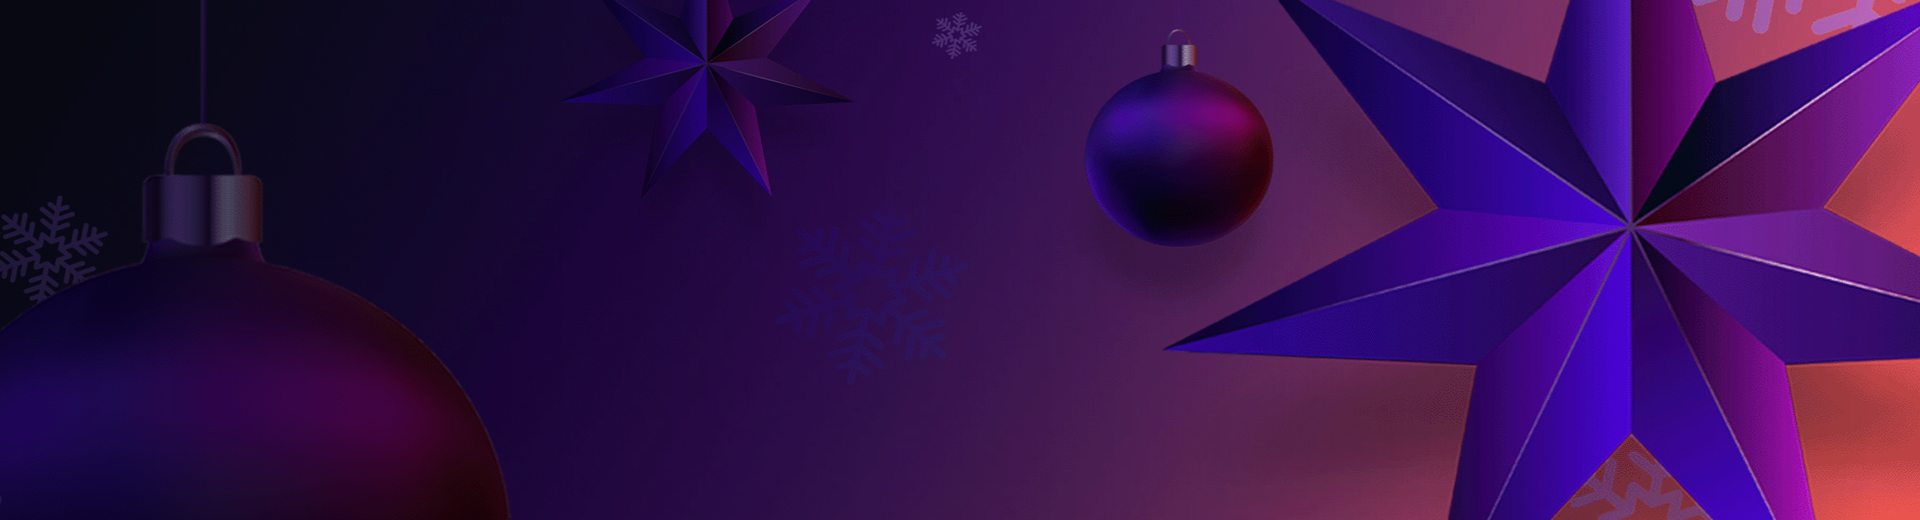 Purple Christmas image with stars and baubles